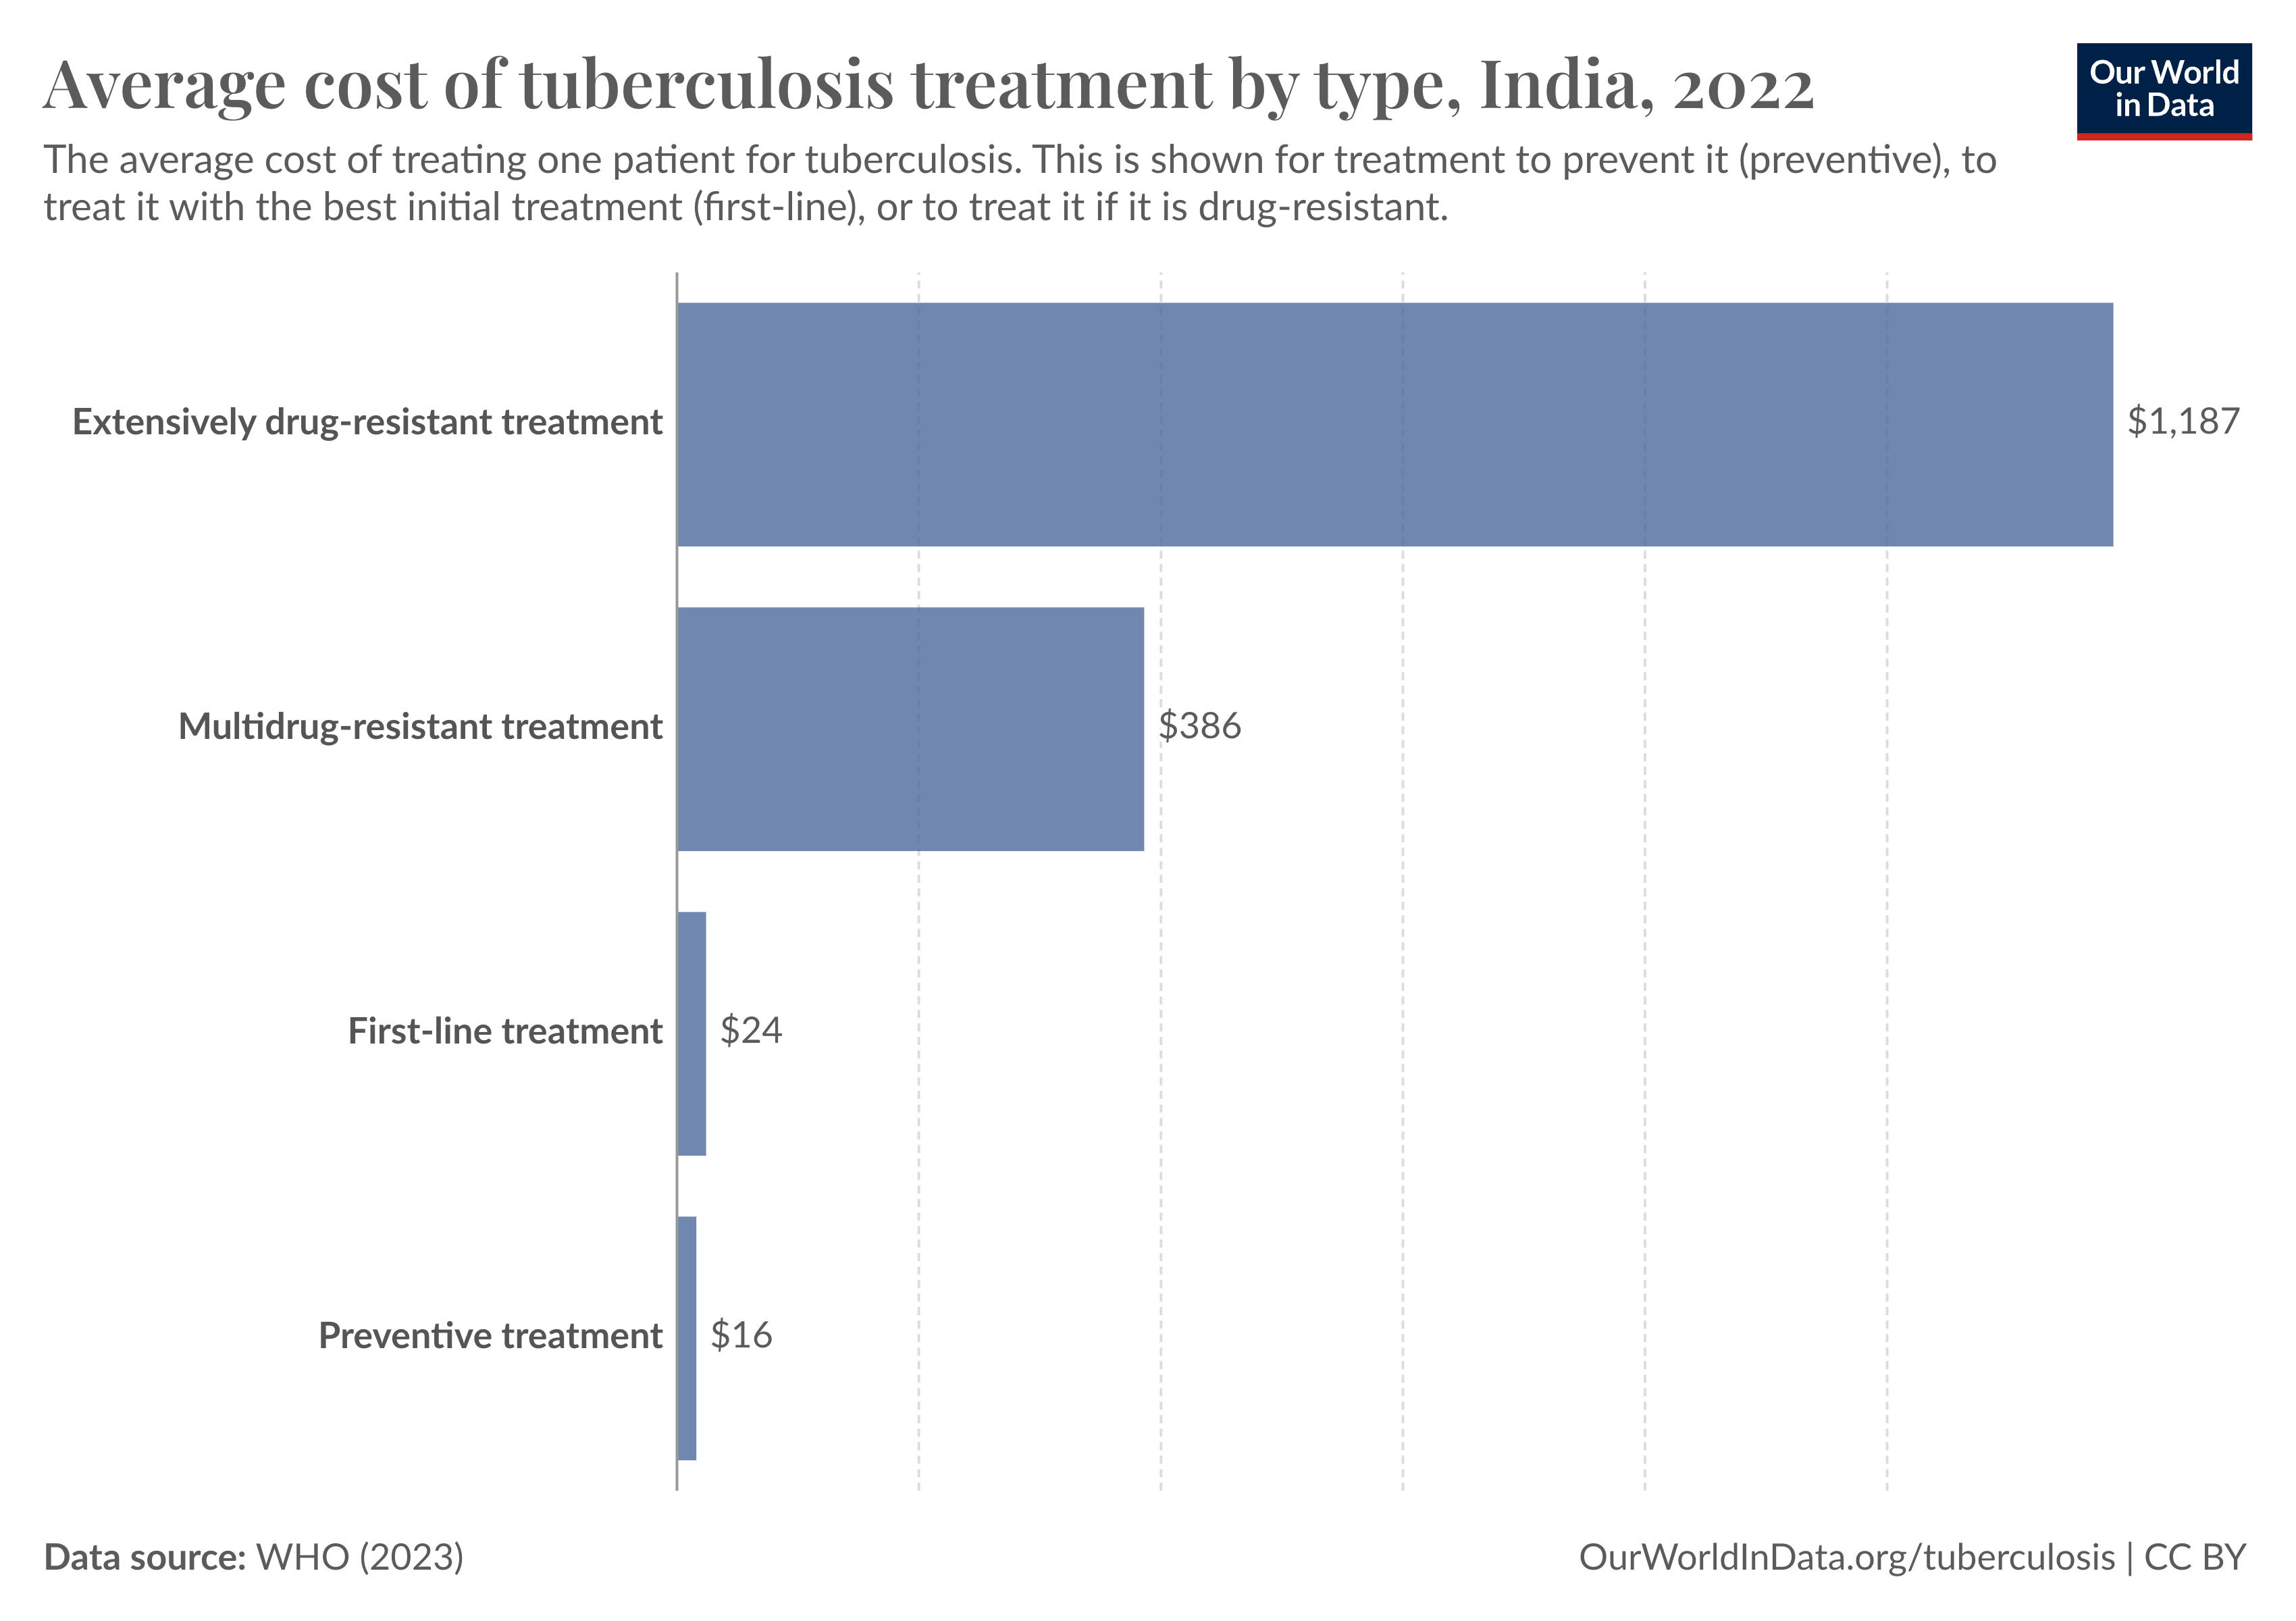 Tuberculosis is usually treatable with a specific combination of antibiotics.

But without proper treatment, the bacteria can survive and potentially develop antibiotic resistance to more and more drugs.

This drug-resistant bacteria can then spread to others, causing disease that’s much more difficult and expensive to treat.

The chart shows the cost of treating a single patient with tuberculosis, depending on their type of tuberculosis.

For tuberculosis patients in India without drug-resistance, the average cost of treatment is only $24.

But among patients who have multi-drug resistant tuberculosis, the cost is almost $400. With extensively drug-resistant tuberculosis, it’s more than $1000.
